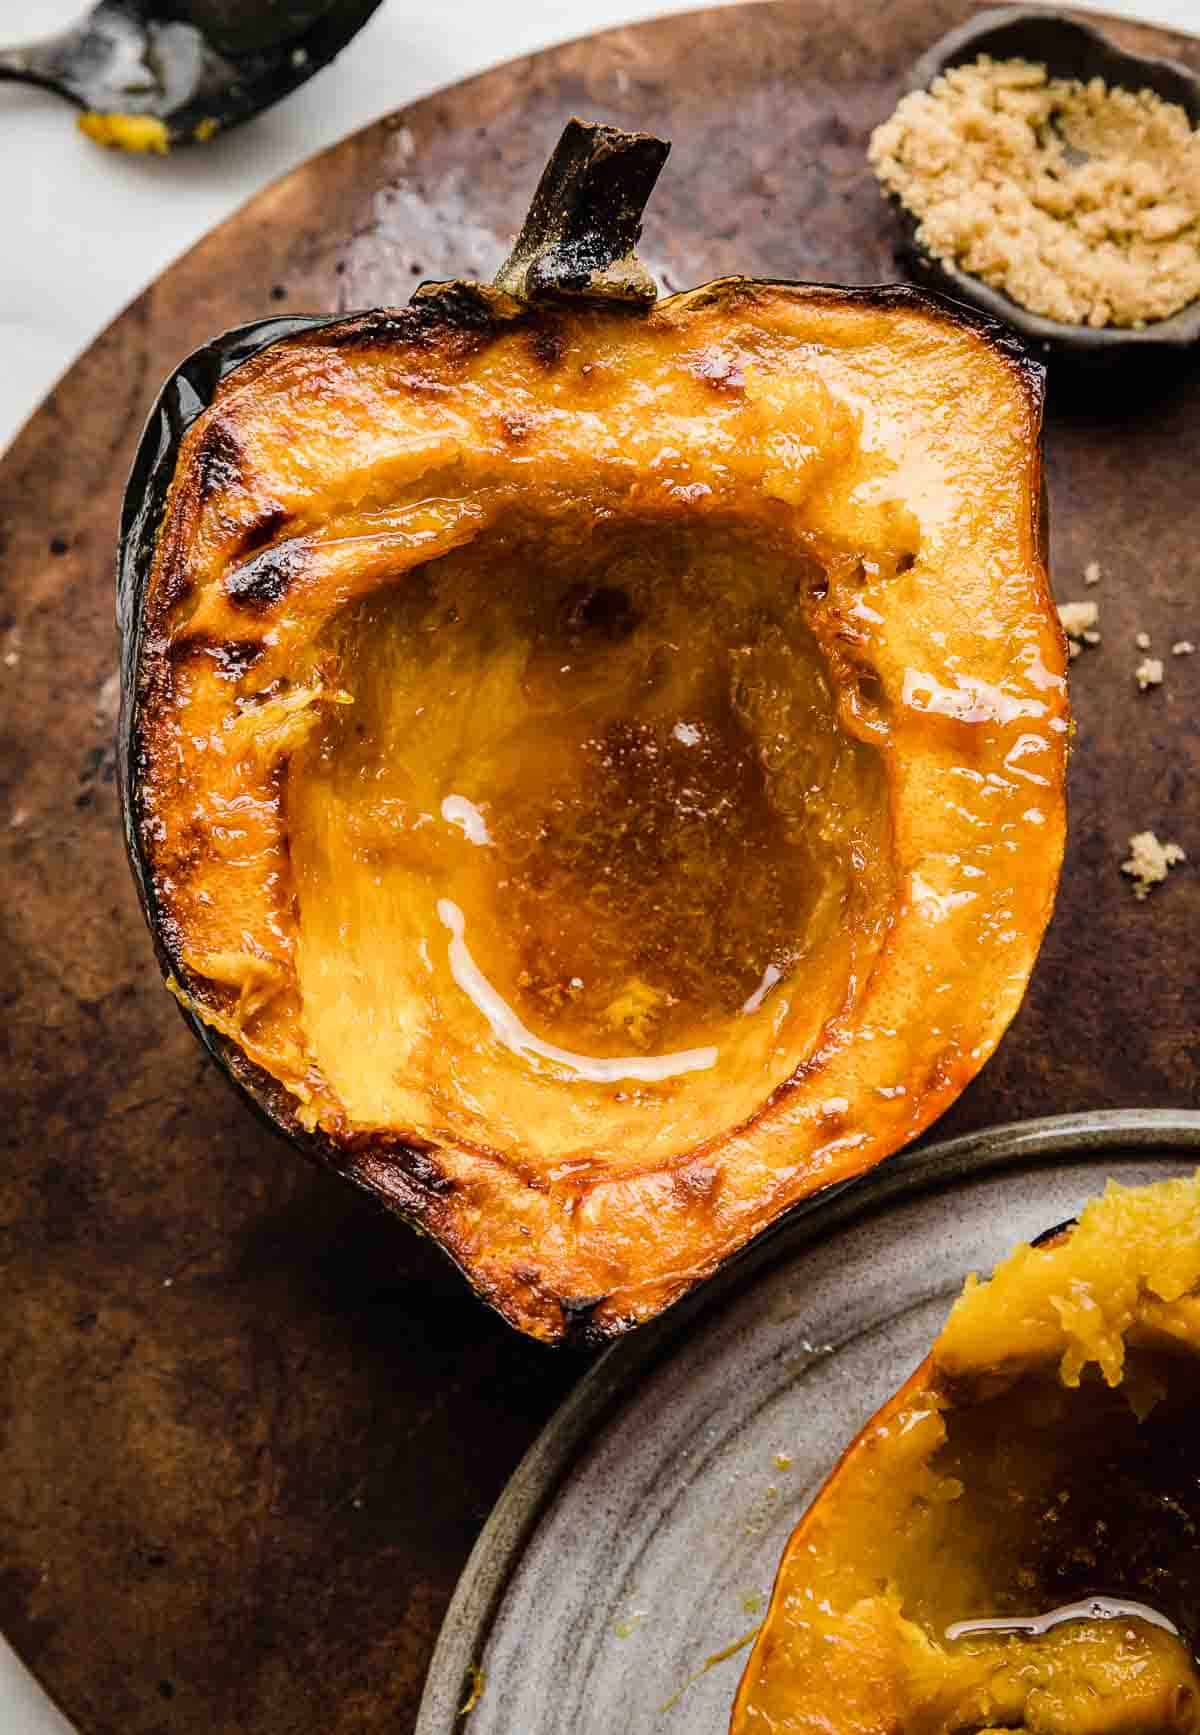 Roasted acorn squash with brown butter brown sugar mixture in the center of the squash.